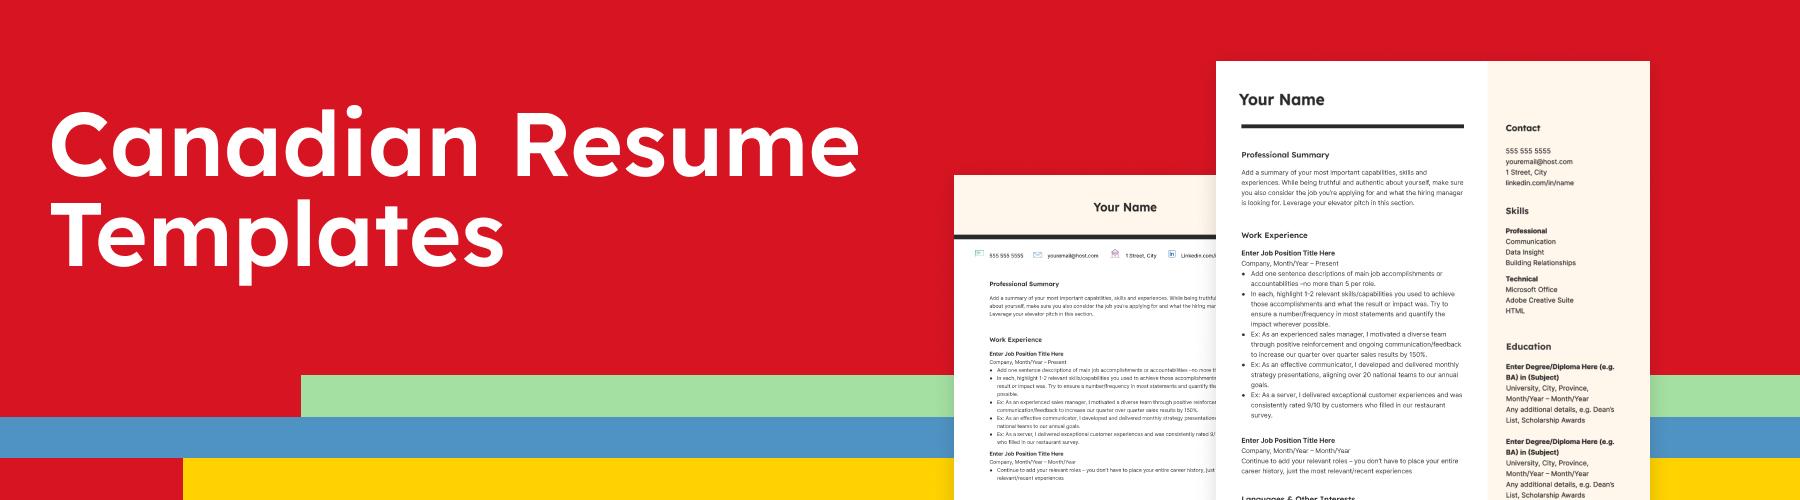 Download our free Canadian resume templates